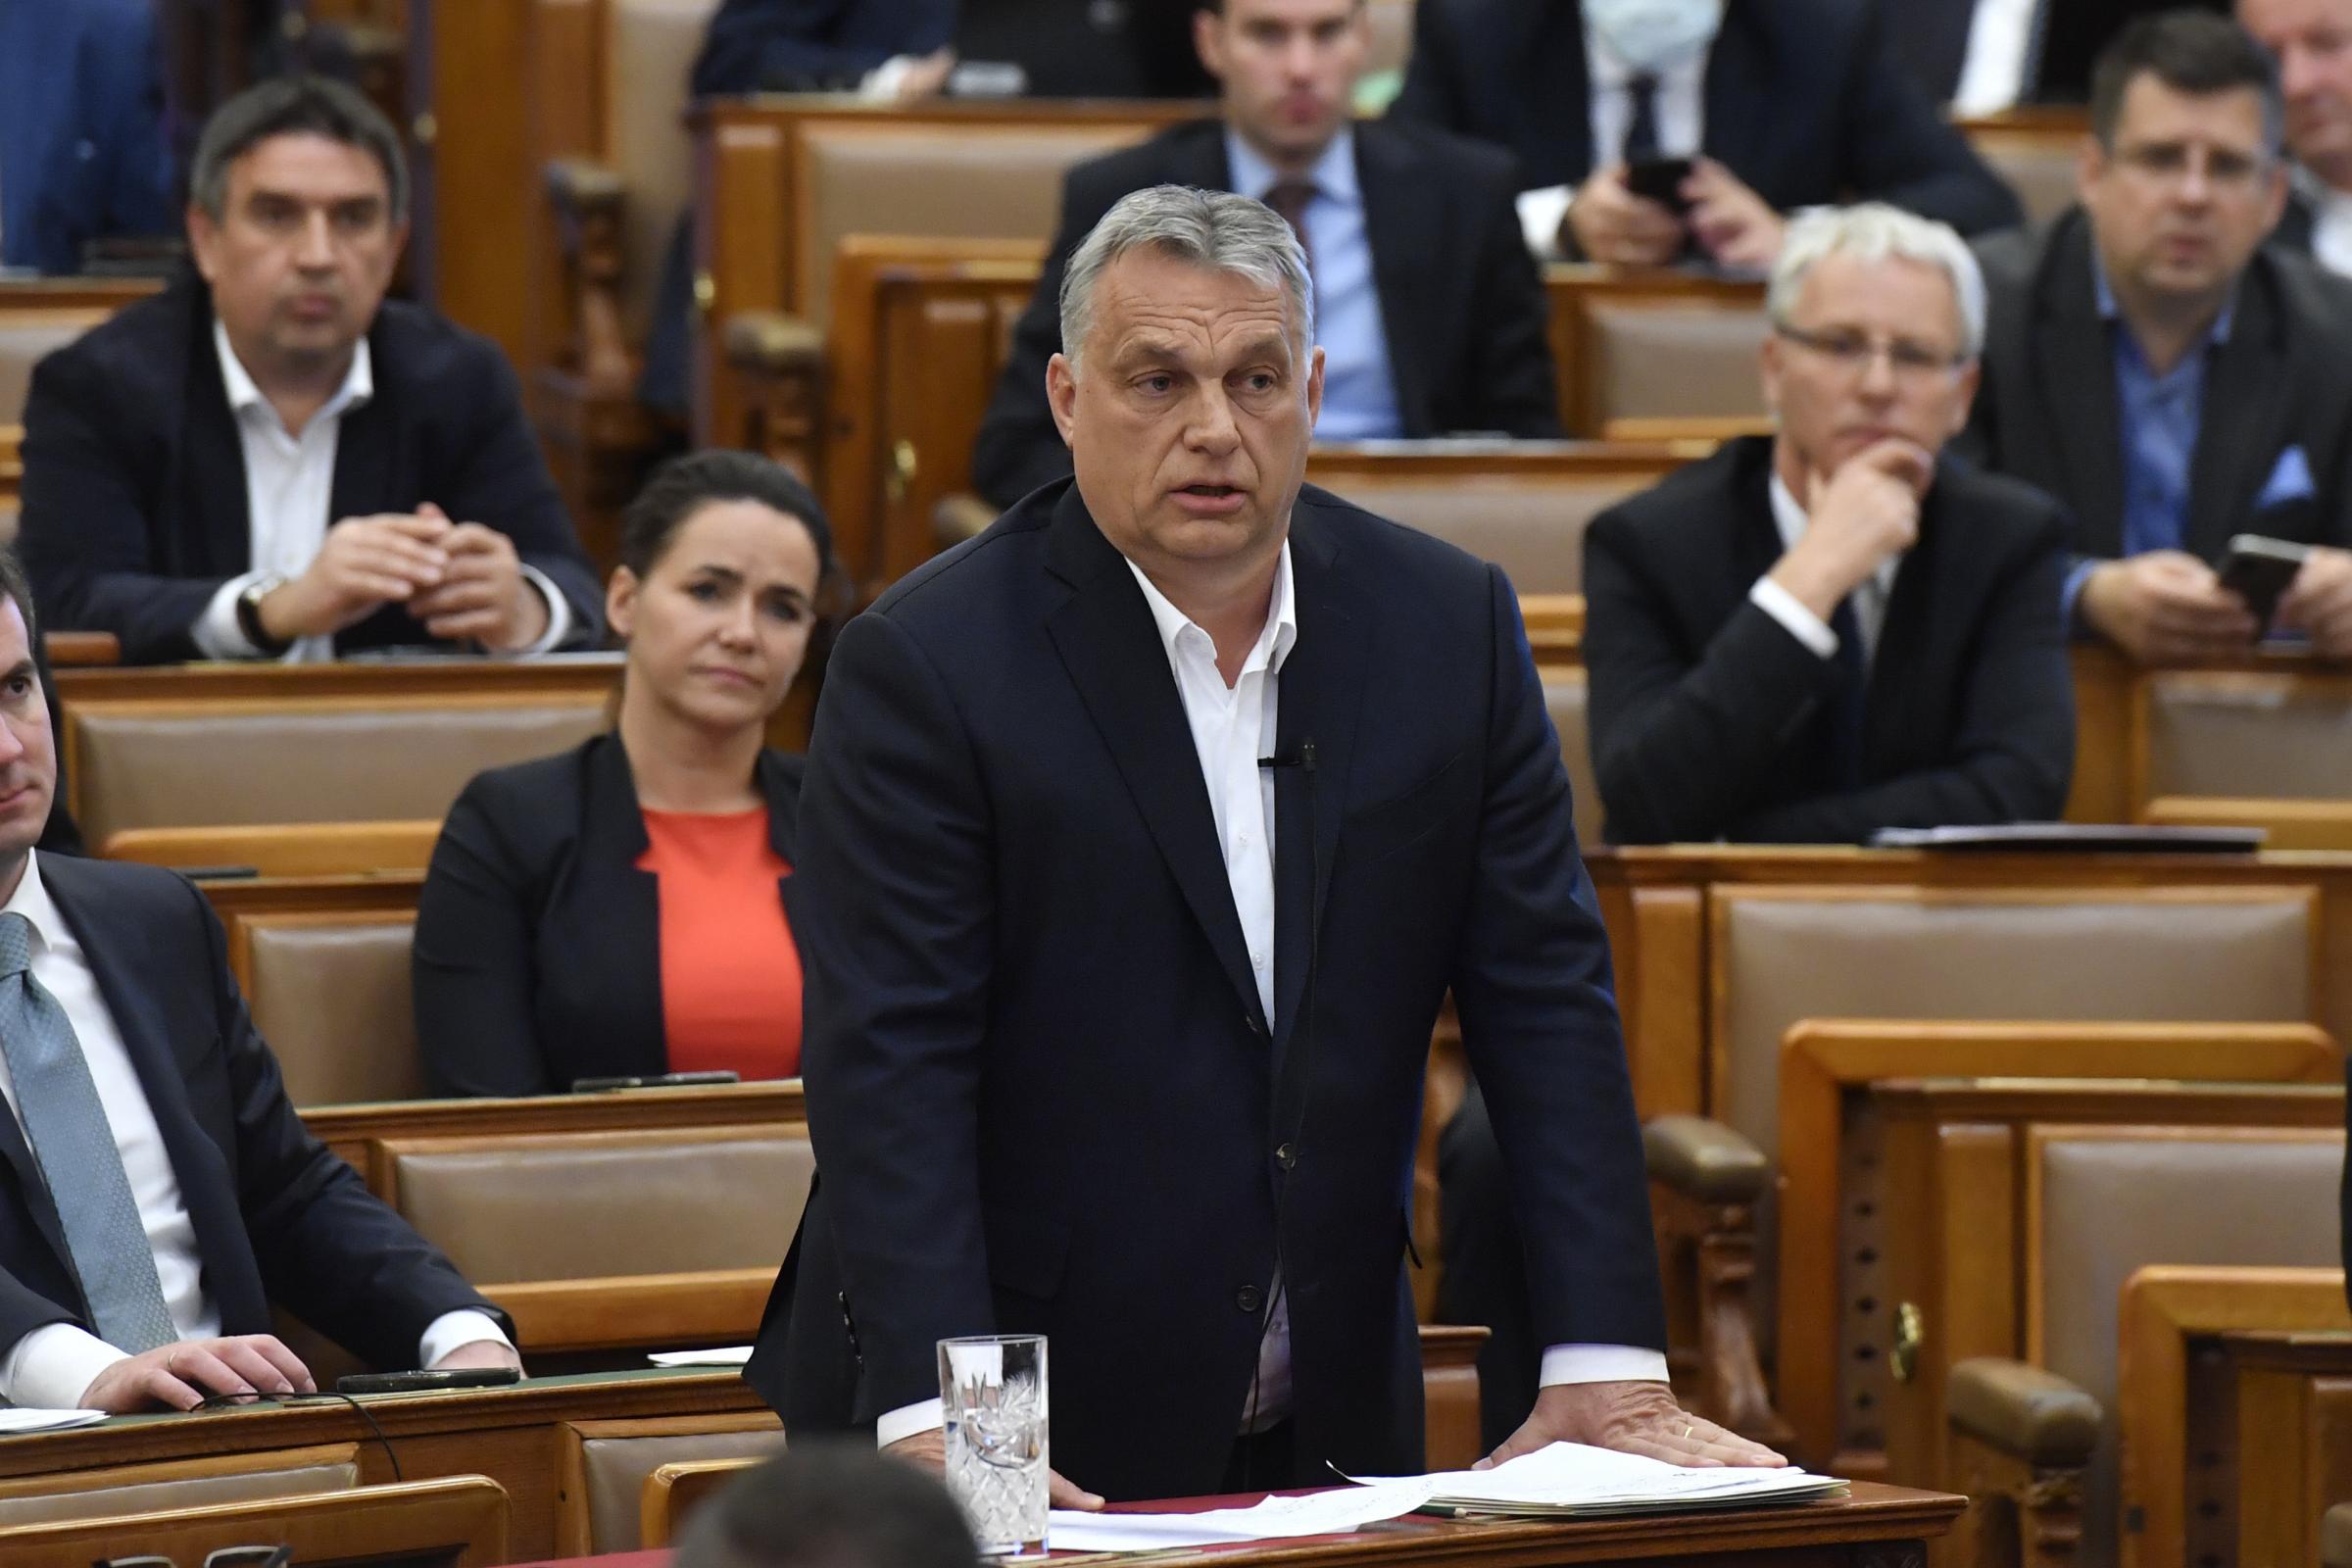 Hungarian Prime Minister Viktor Orban replies to an oppositional MP during a question and answer session of the Parliament in Budapest, Hungary, Budapest, Hungary, Monday, March 30, 2020. Hungarys parliament on Monday approved a bill giving Prime